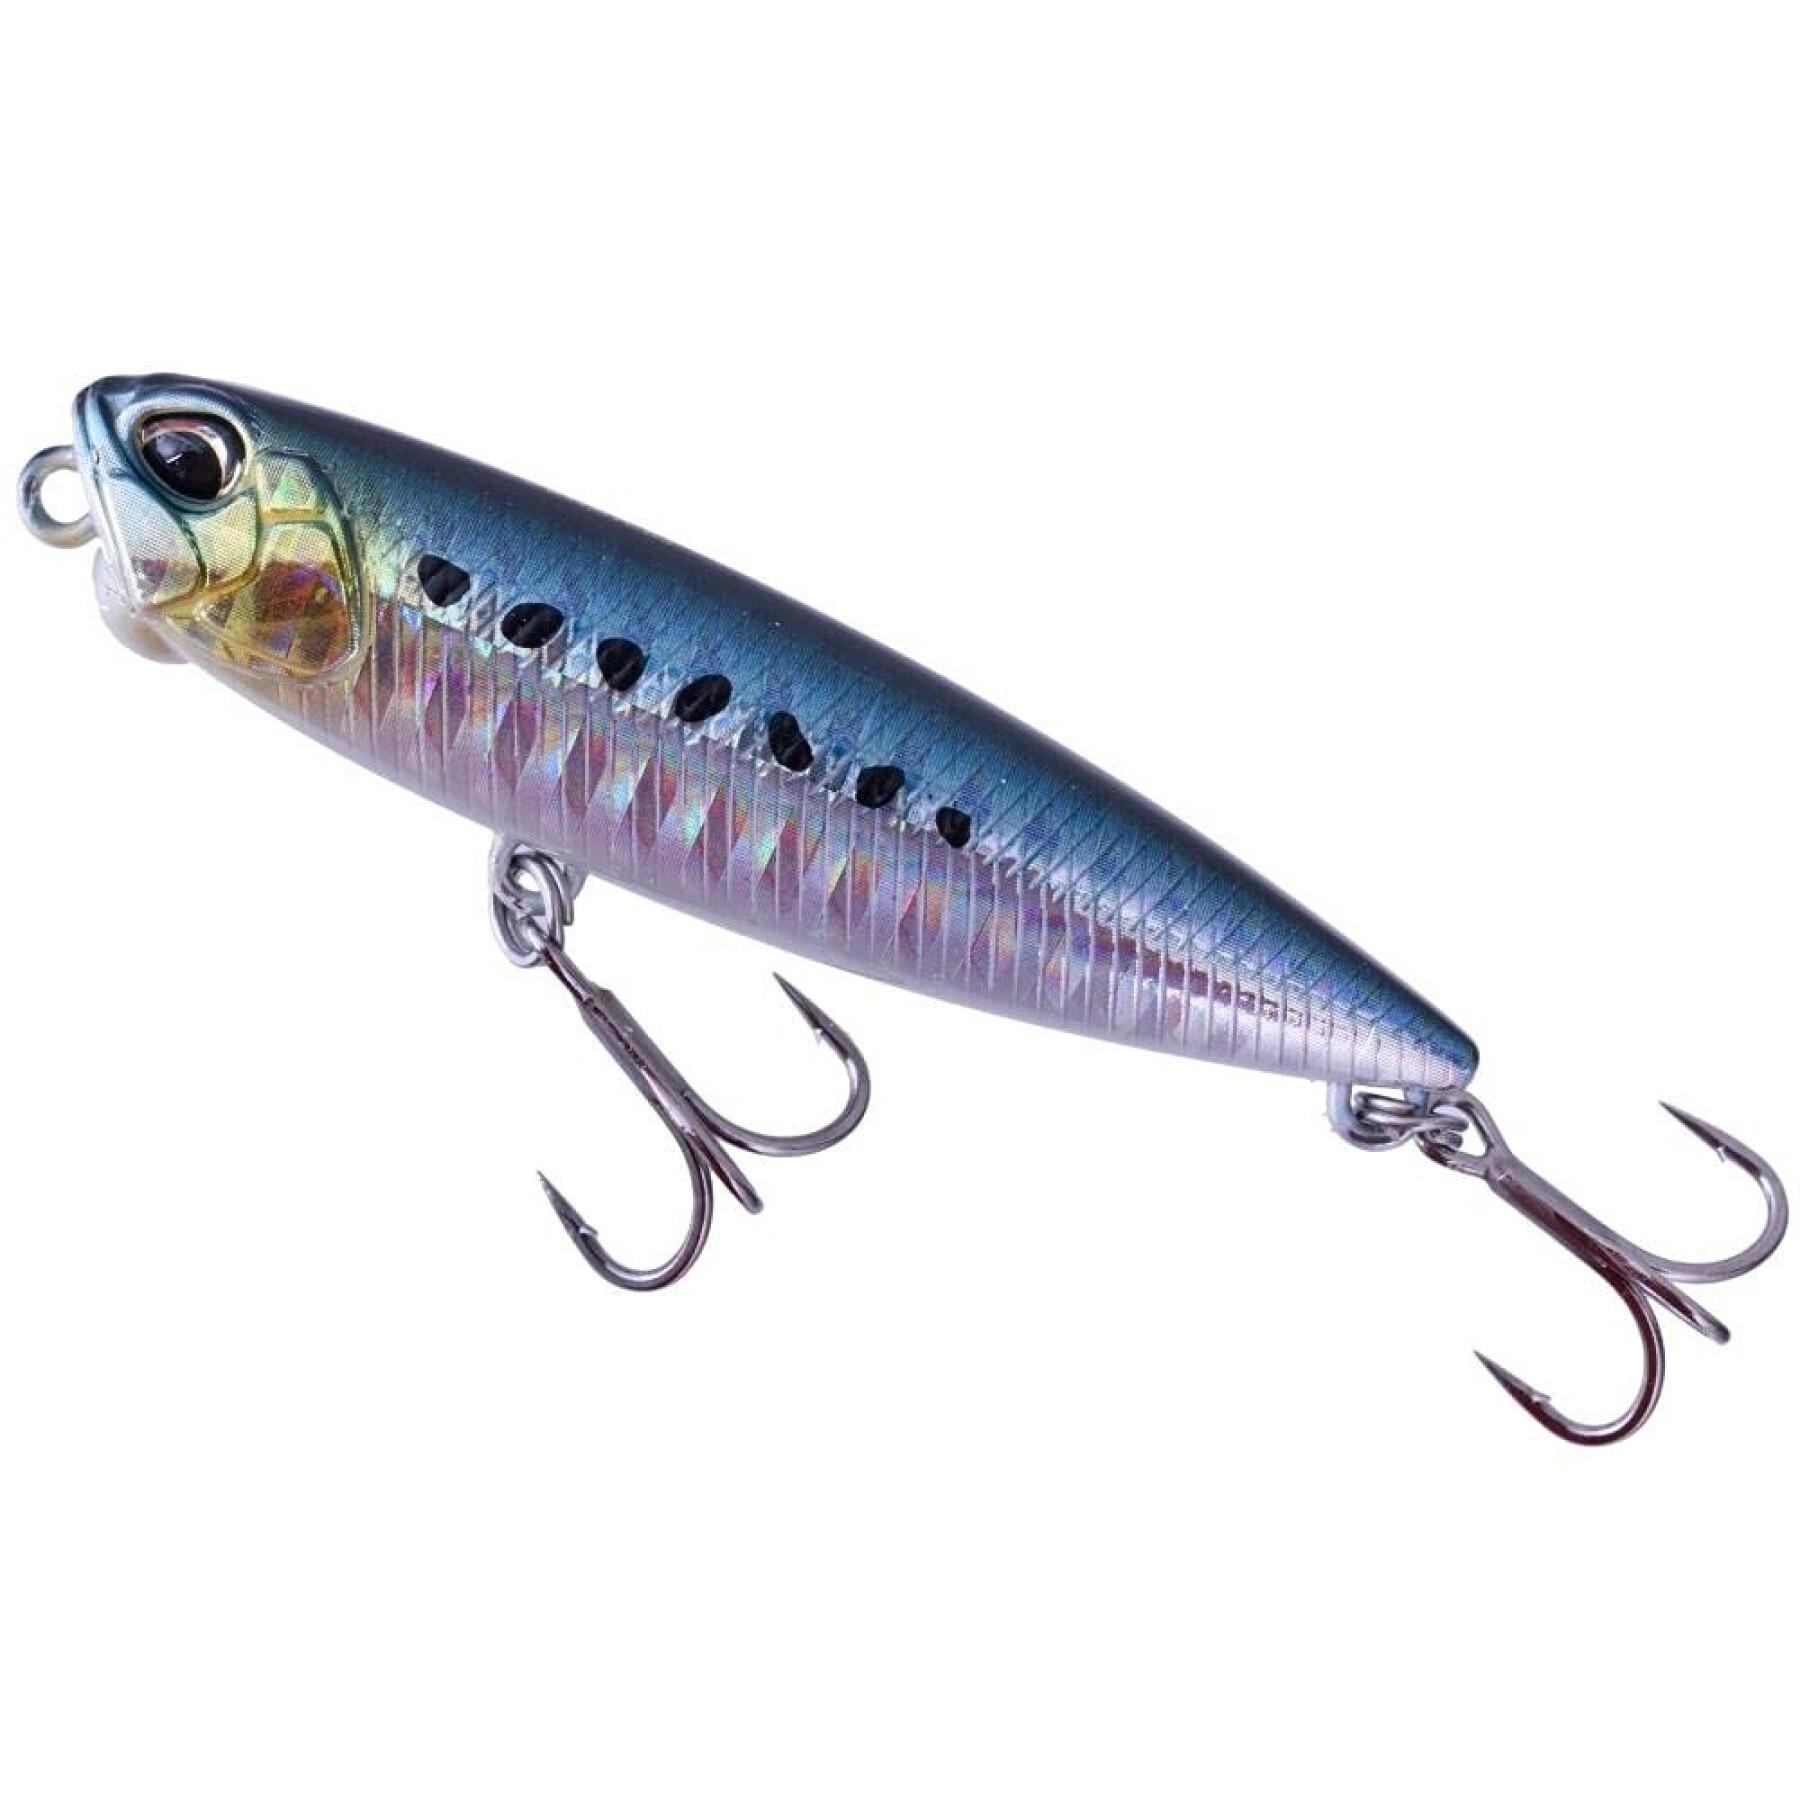 Lure Duo Pencil 85 9g